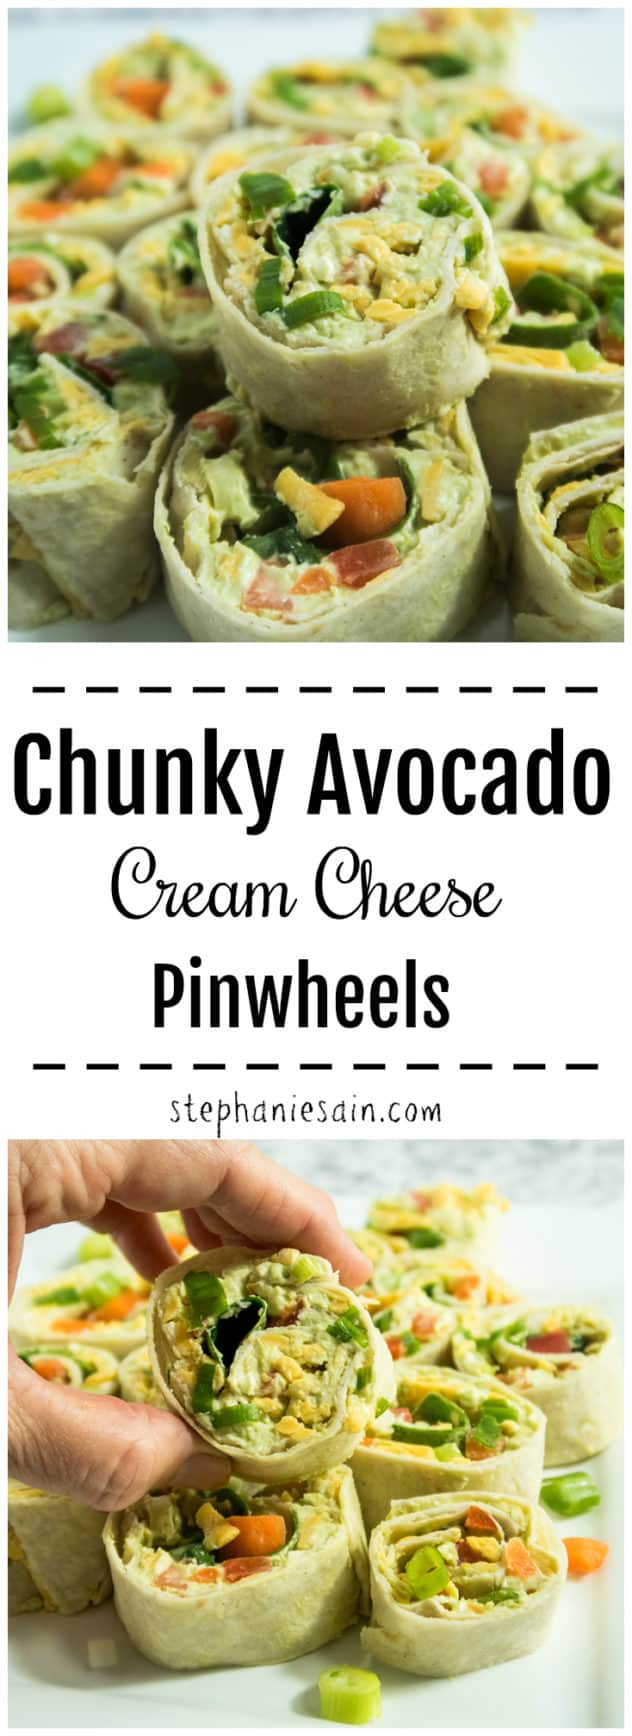 Chunky Avocado Cream Cheese Pinwheels are made with a tasty avocado spread and then loaded with all your favorite veggies. The perfect bite sized snack or even appetizer for entertaining. Gluten free & Vegetarian.